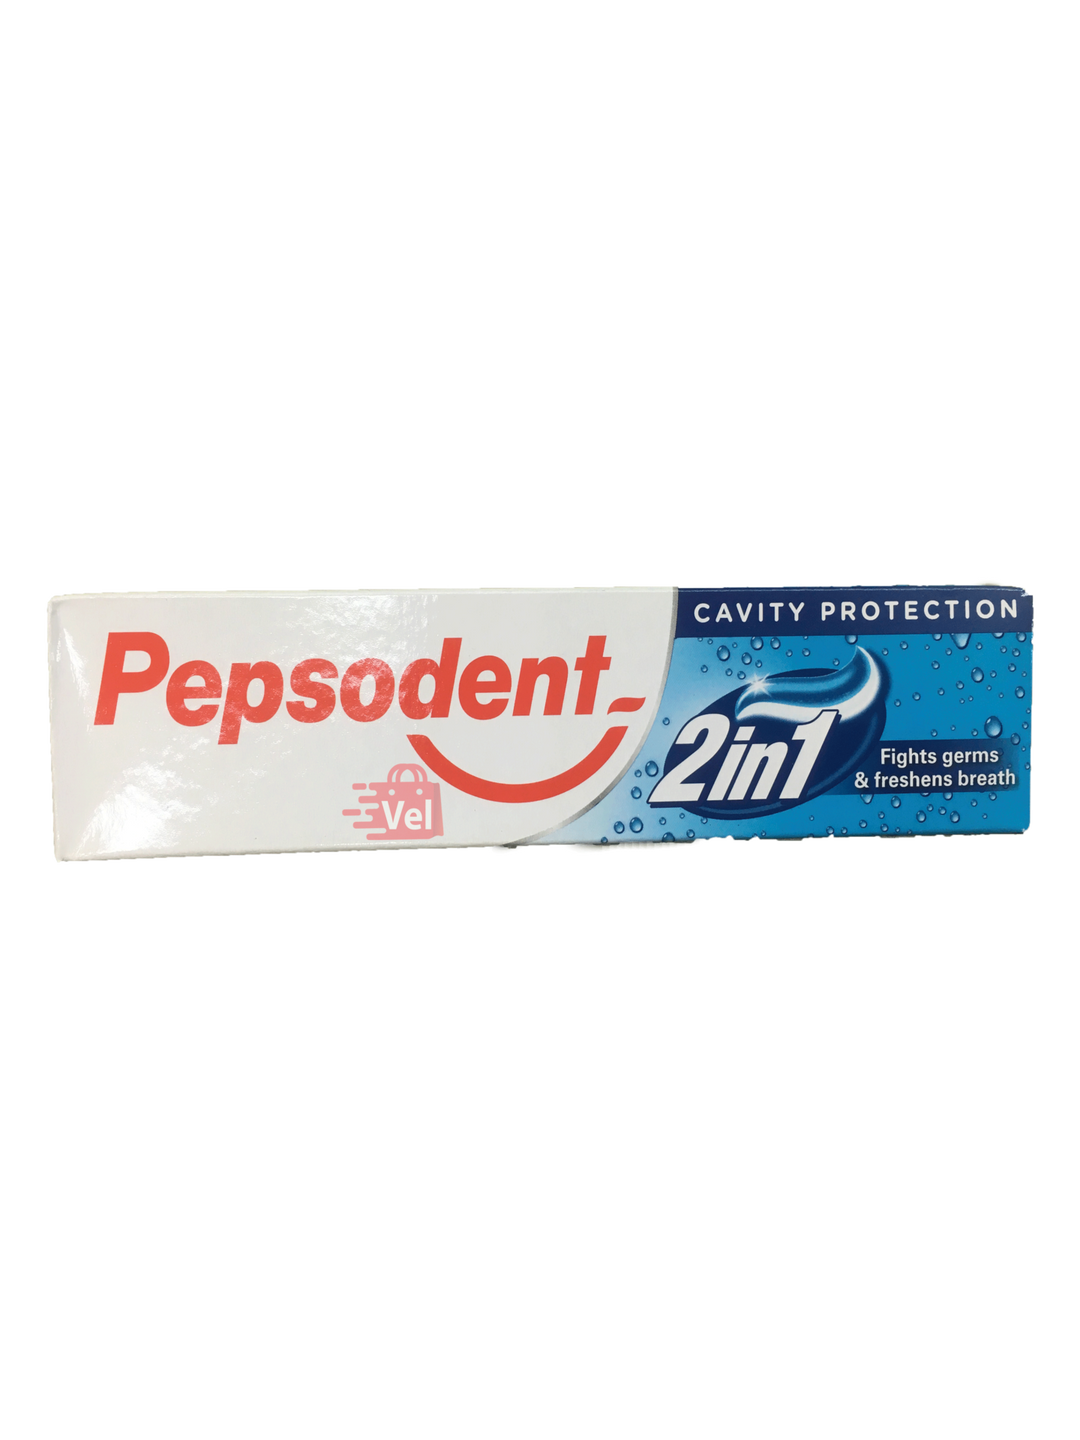 Pepsodent Tooth Paste 2 In 1 150g